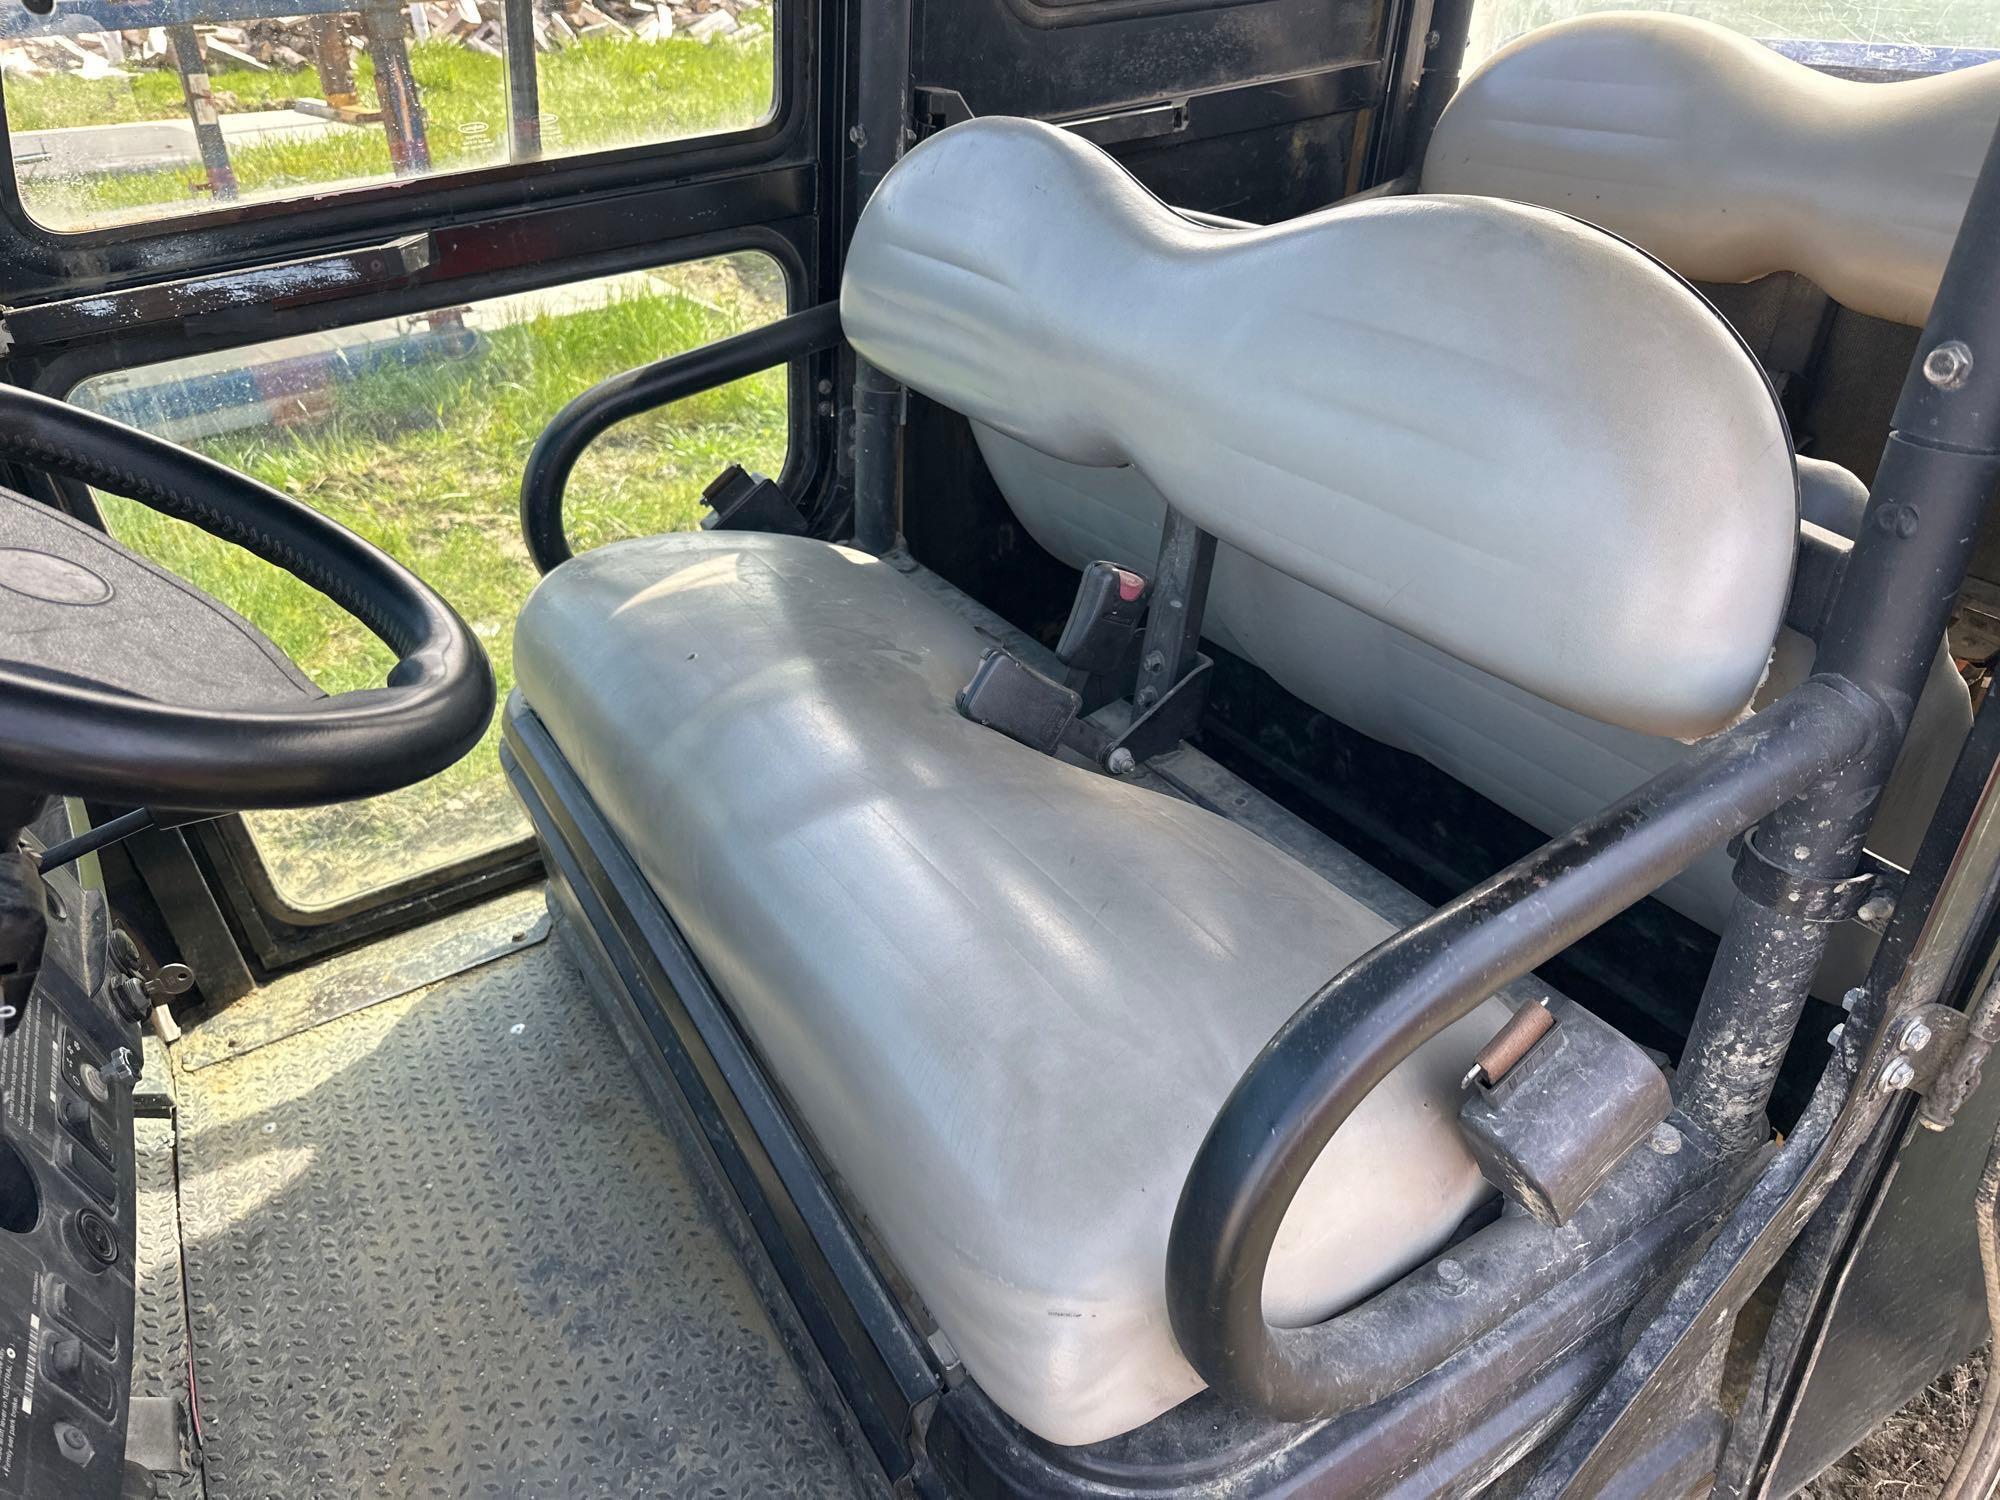 2017 CLUB CAR CARRYALL 1700 UTILITY VEHICLE 4x4, powered by diesel engine, equipped with EROPS,